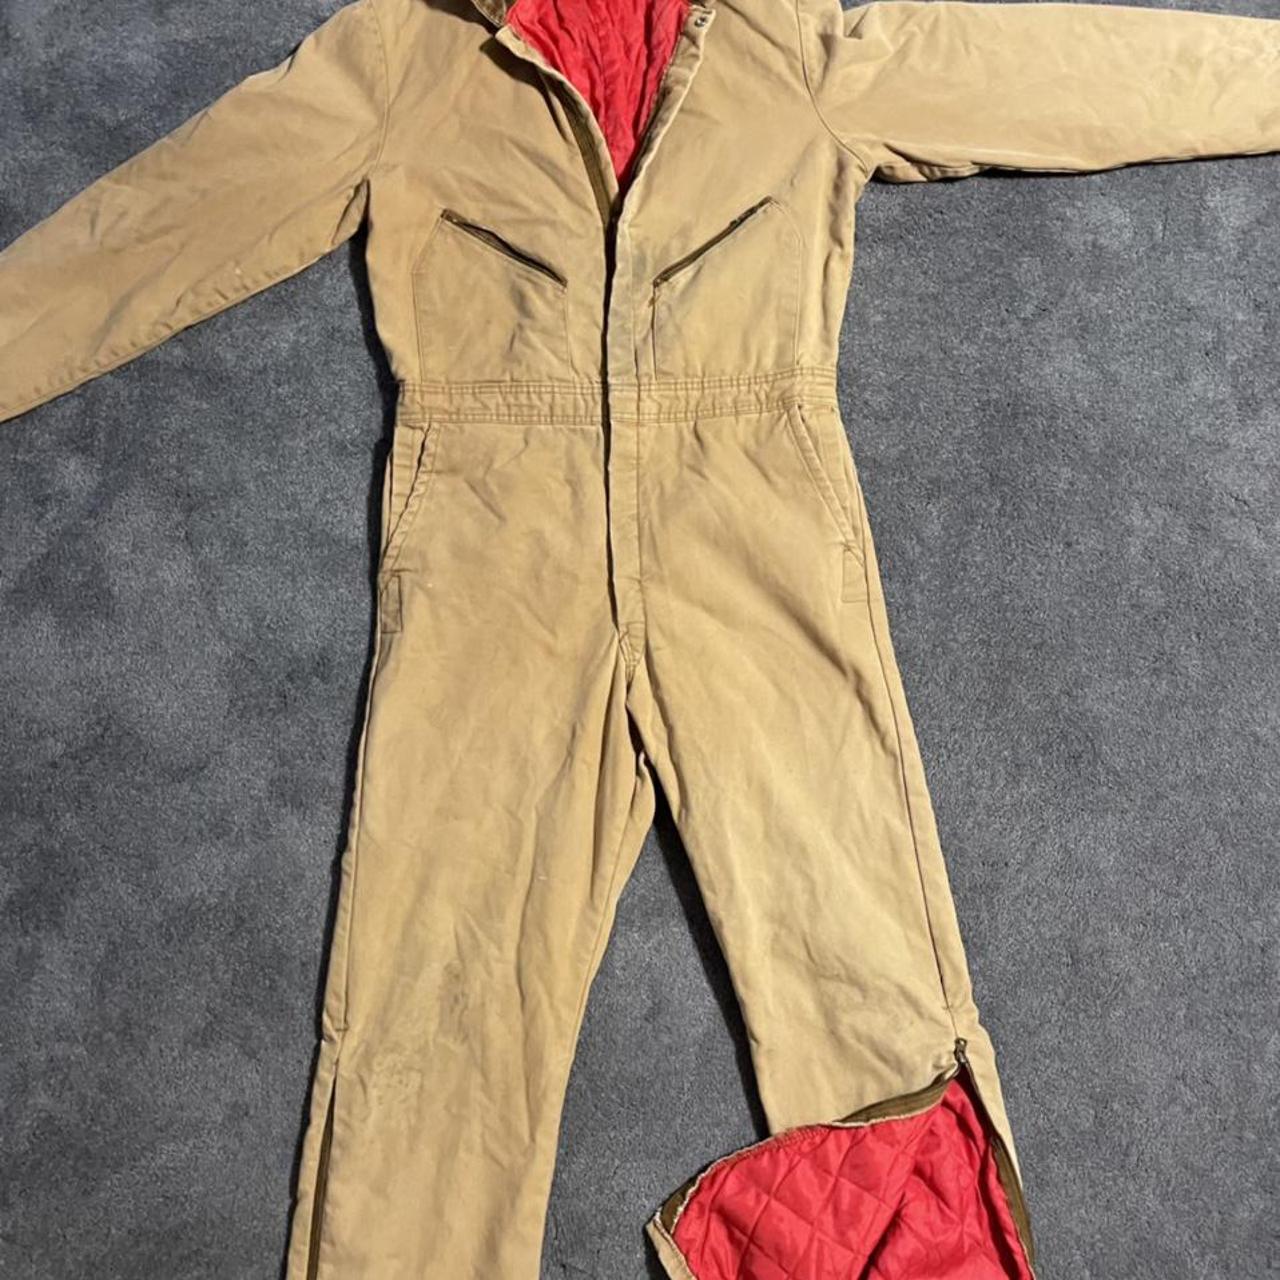 Product Image 1 - Vintage Walls Blizzard-Pruf coveralls. Has